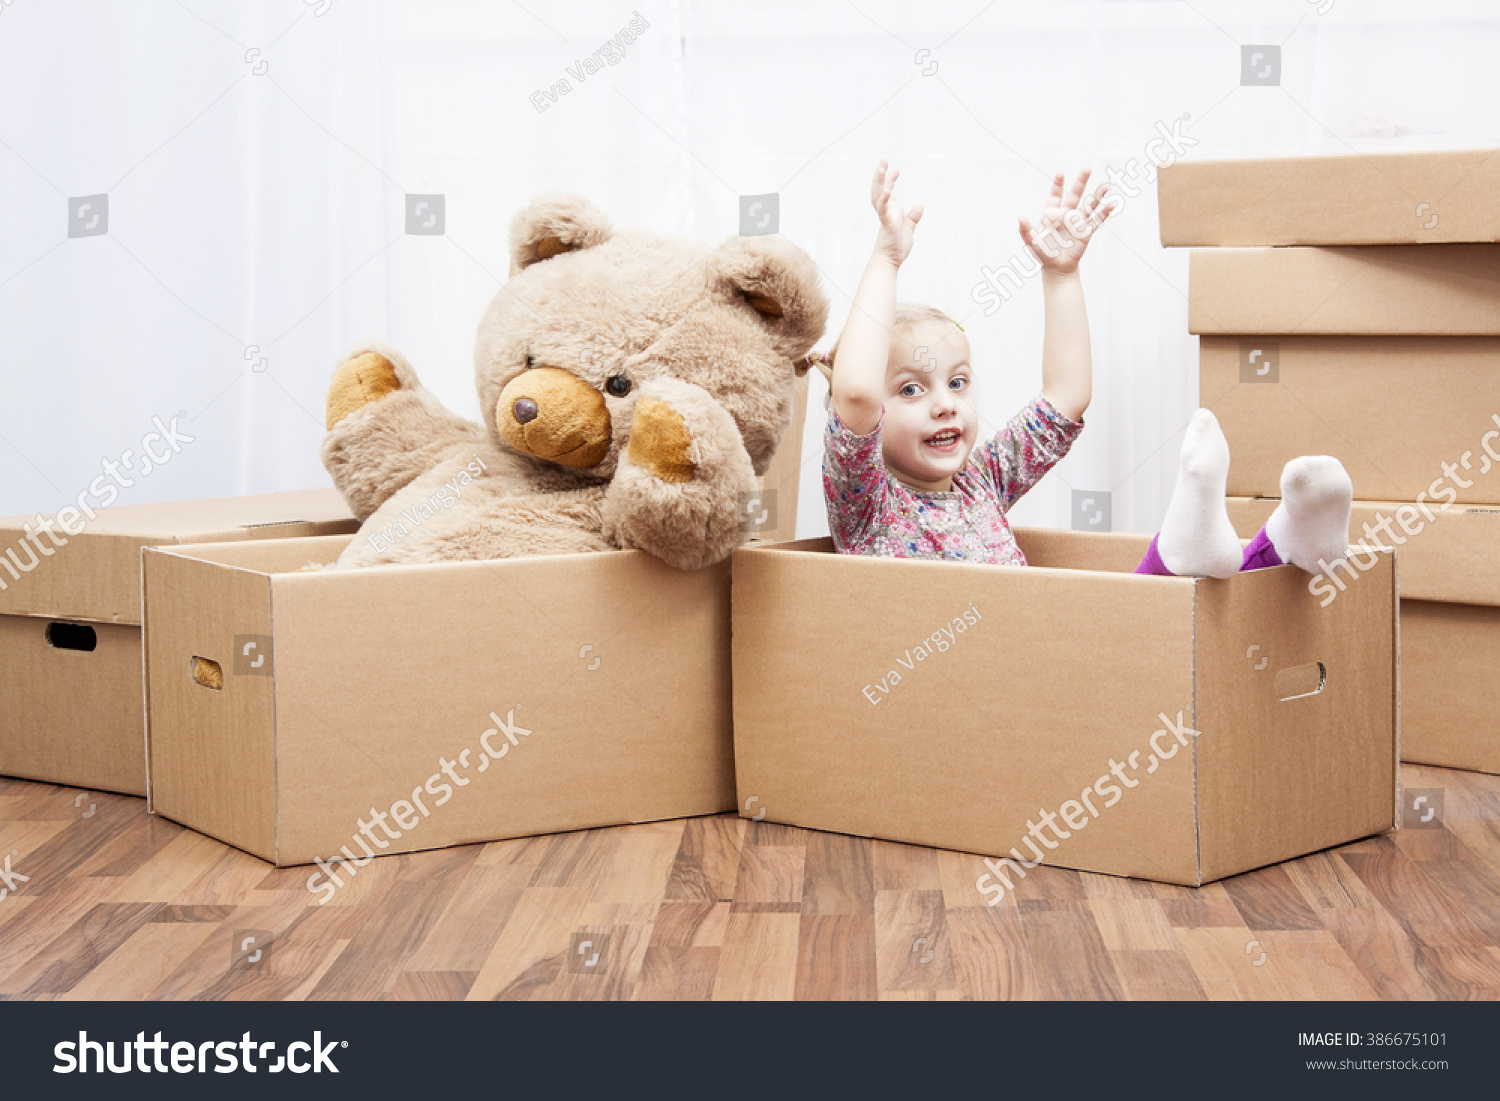 teddy in a box delivery